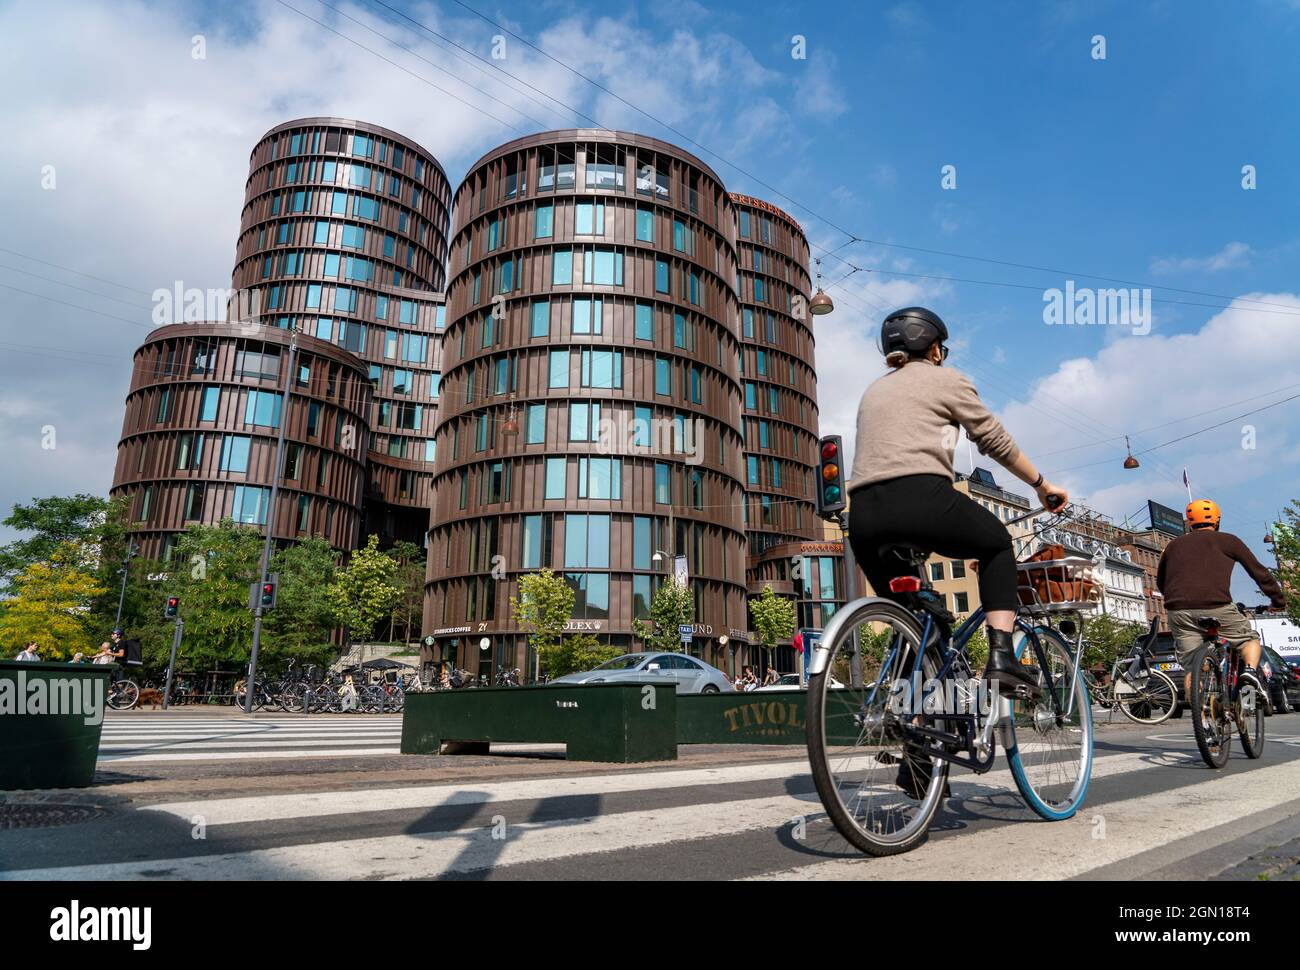 Cyclists on cycle paths in the city centre of Copenhagen, considered the cycling capital of the world, 45 % of the inhabitants travel by bike, modern Stock Photo